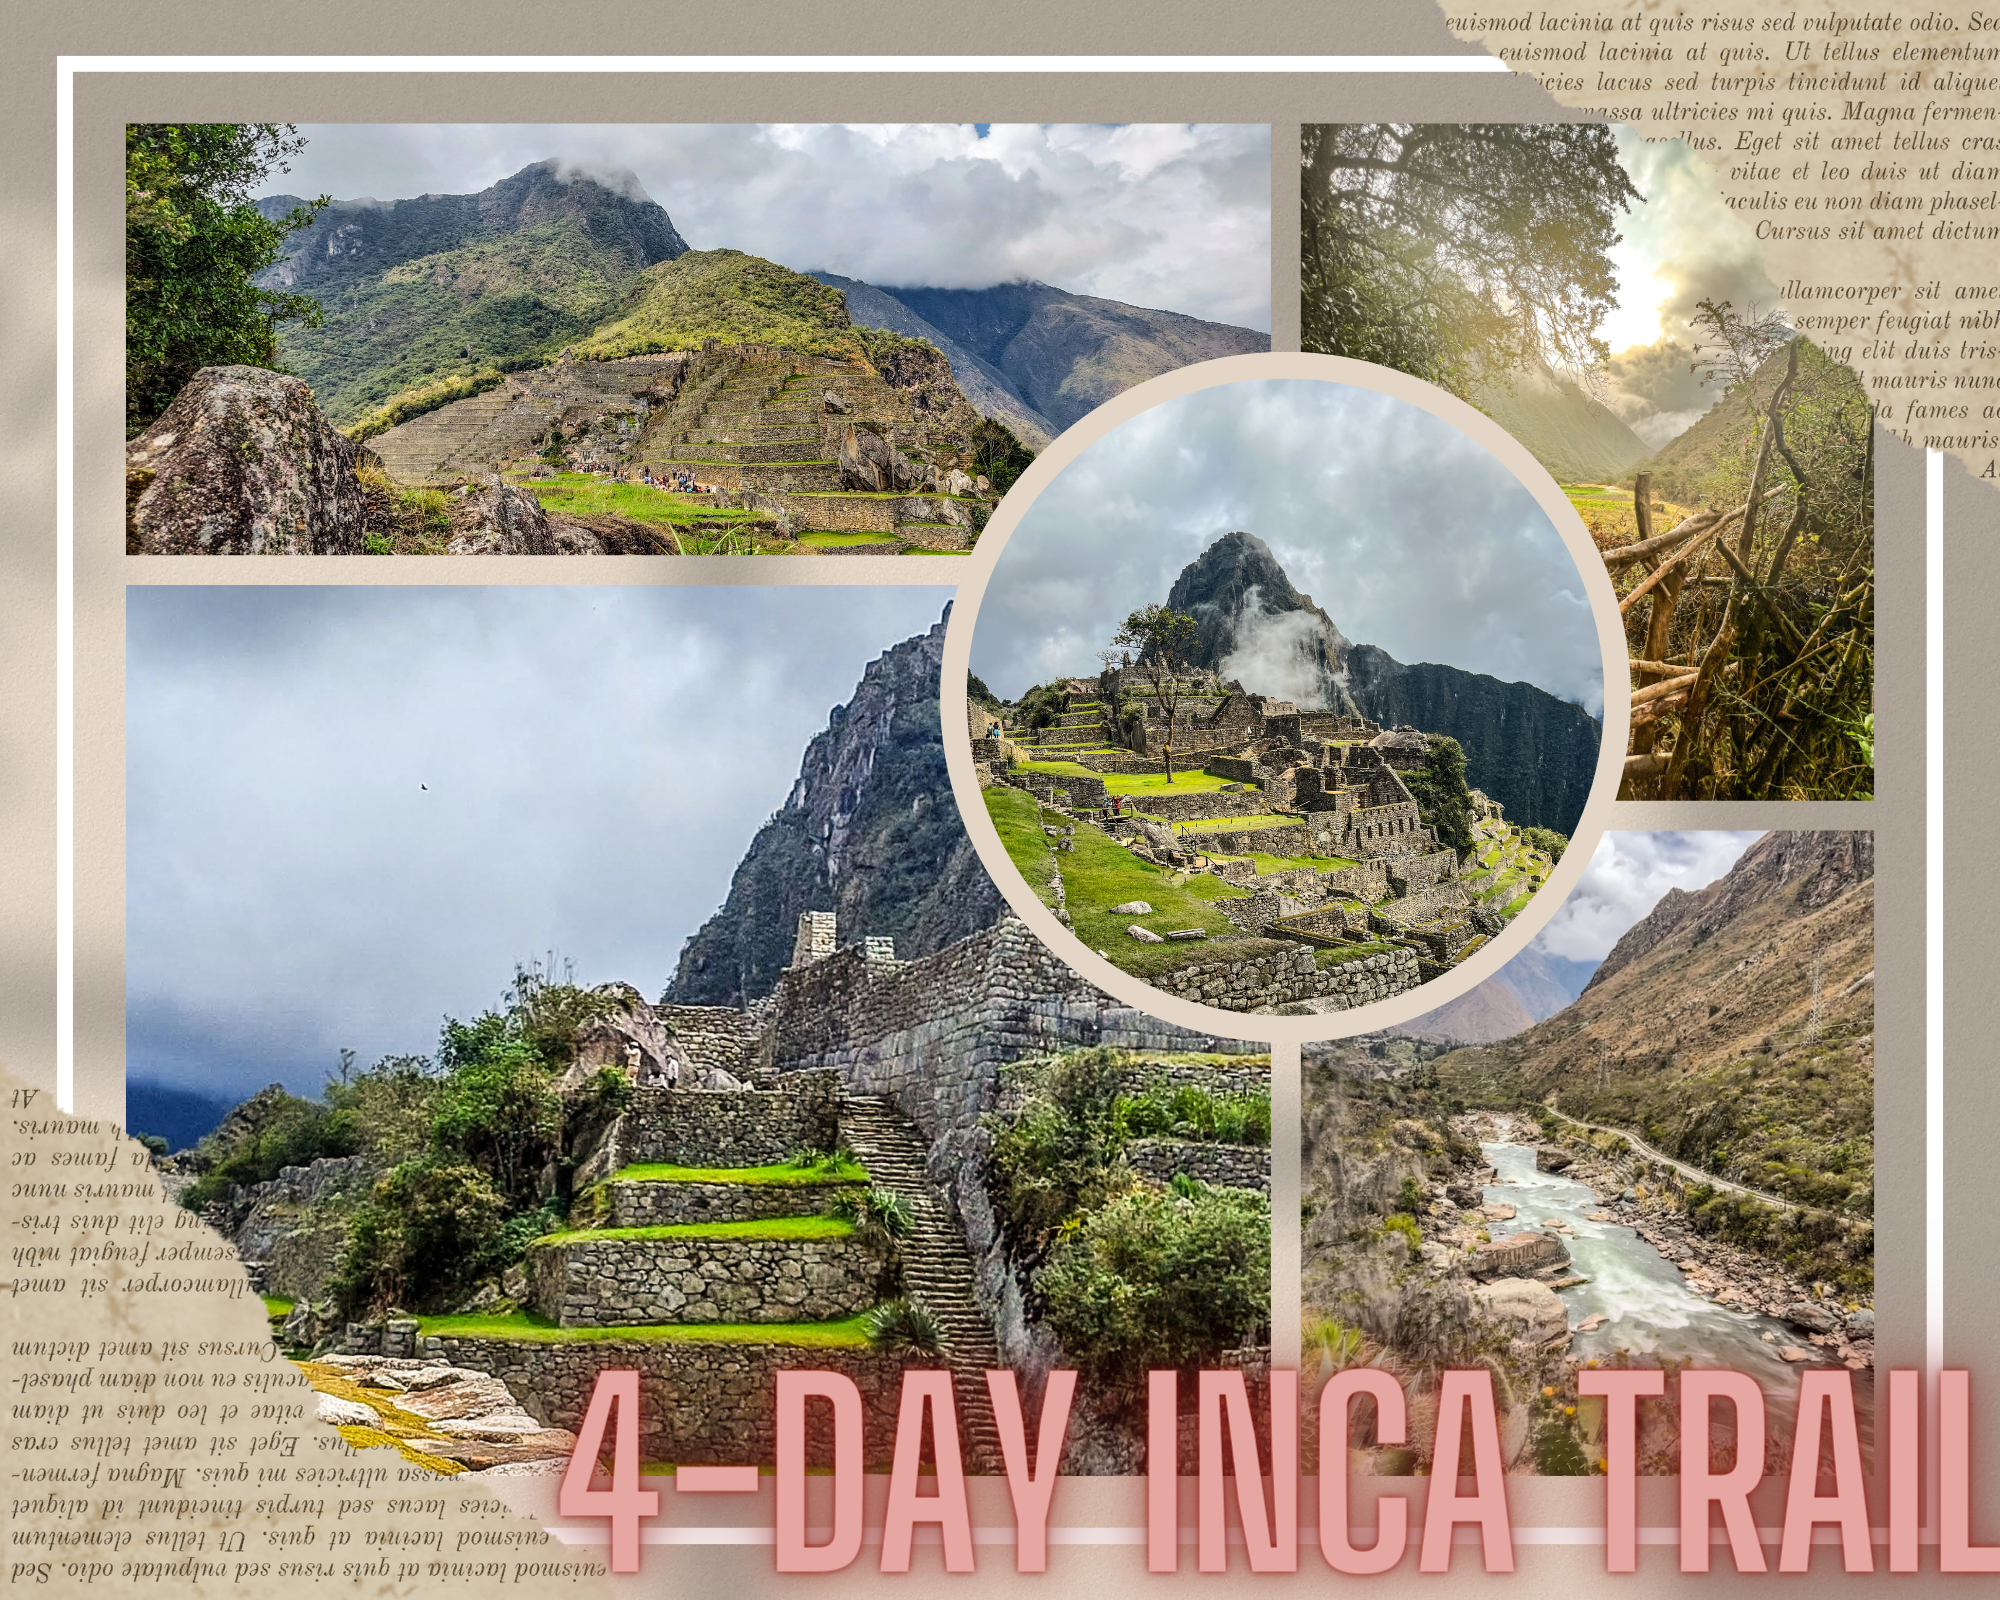 Embarking on the Journey of a Lifetime: The 4-Day Inca Trail Hike to Machu Picchu